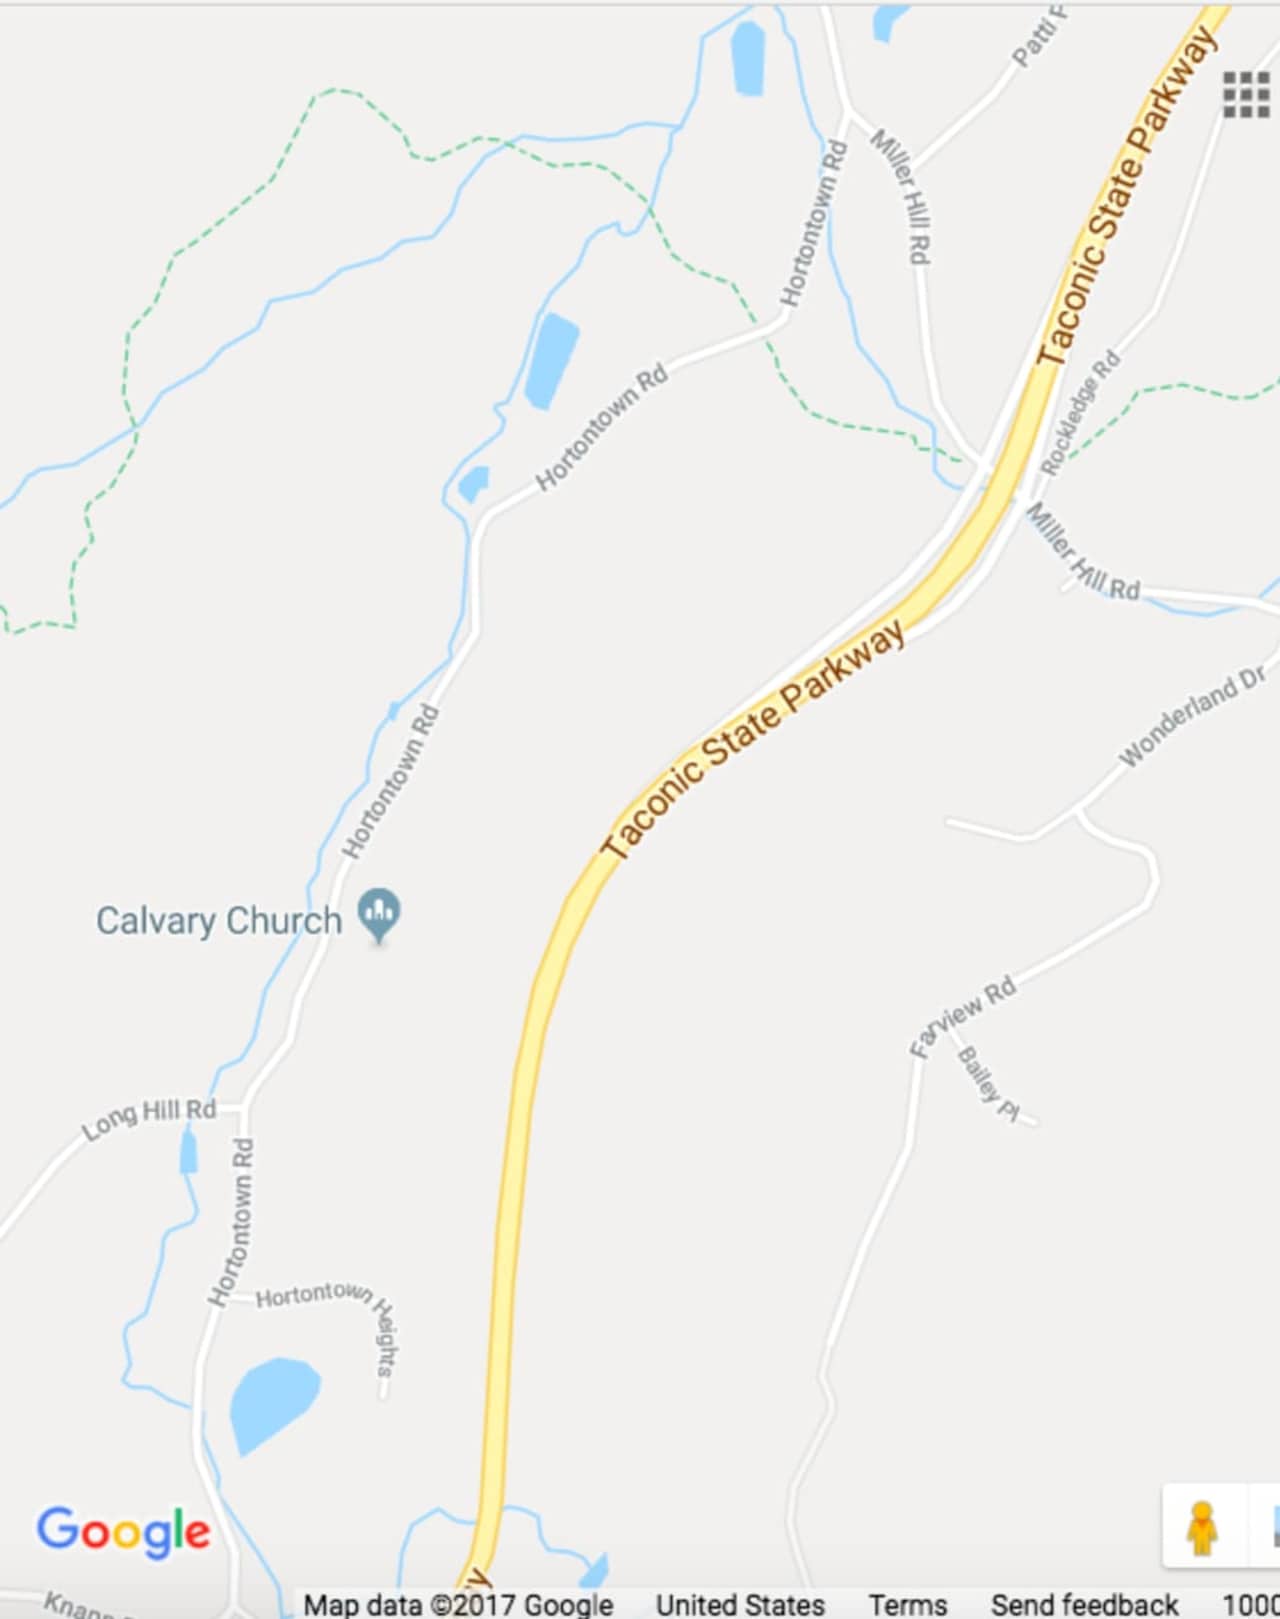 The area of the Taconic State Parkway where the crash occurred.